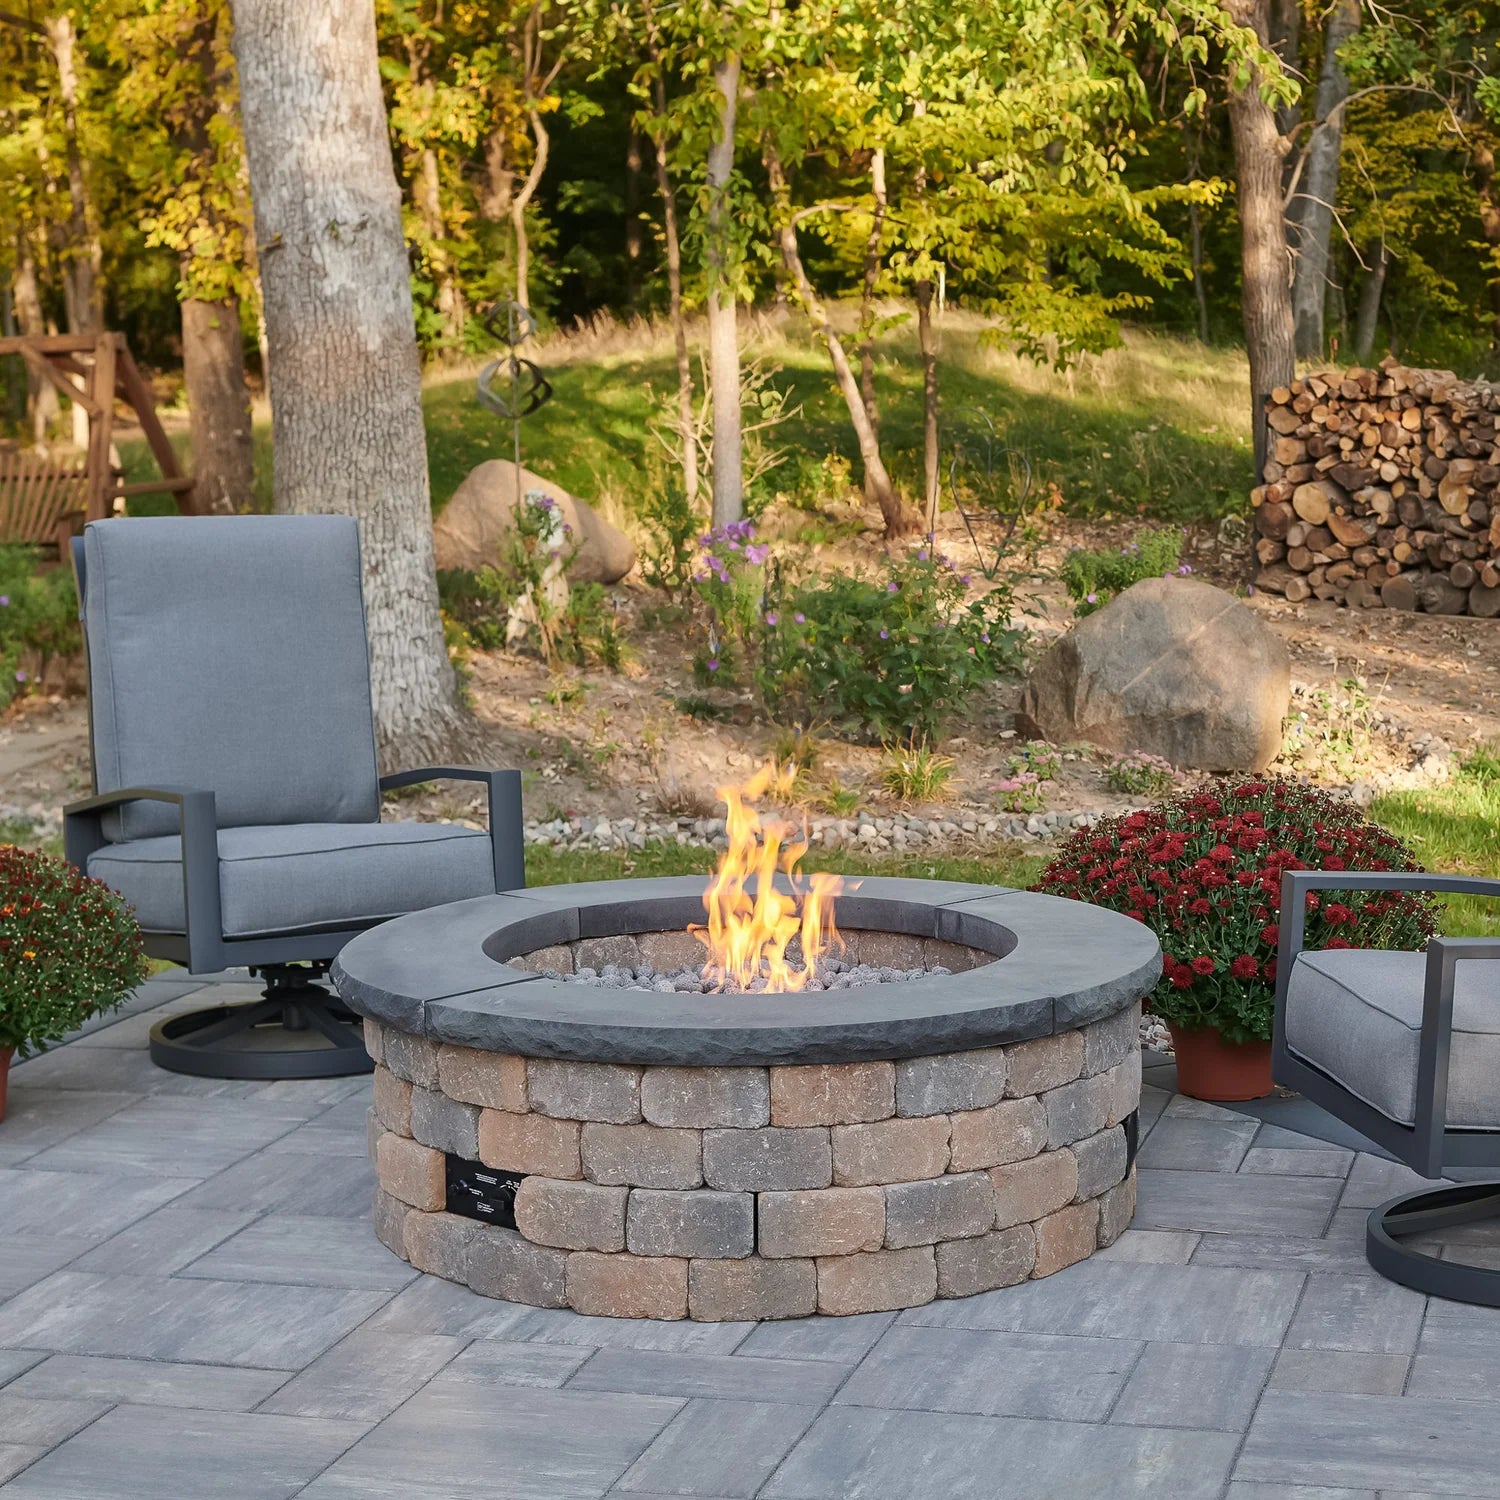 Outdoor Greatroom Co Bronson Block Gas Fire Pit Kit Round in use, featuring a charcoal top, SKU BRON52-K.